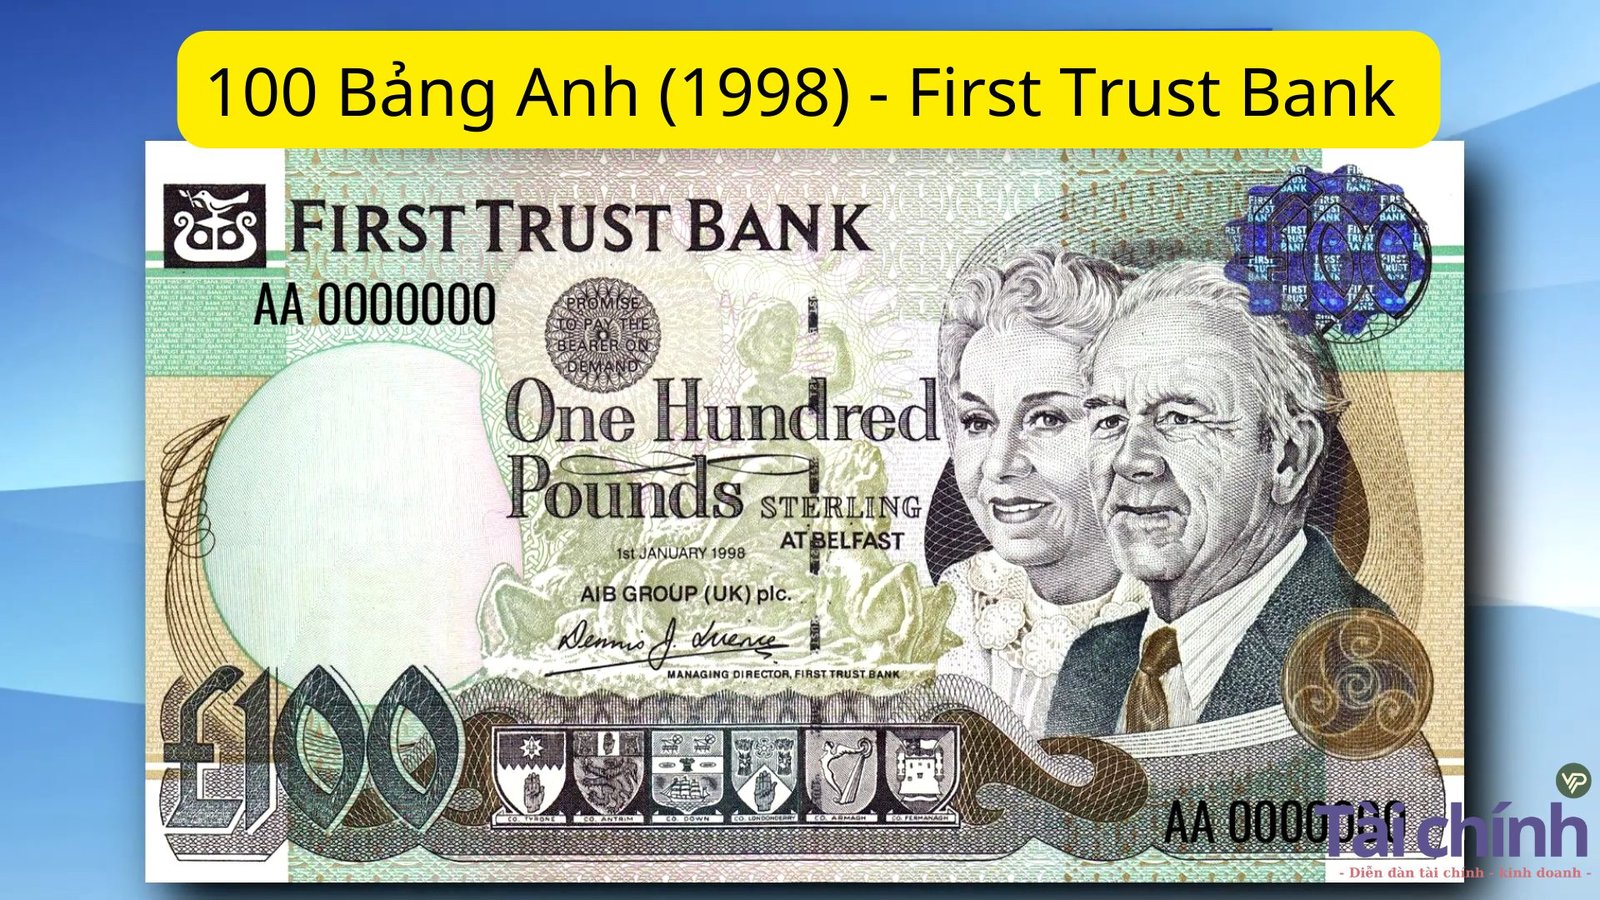 100 Bảng Anh (1998) - First Trust Bank